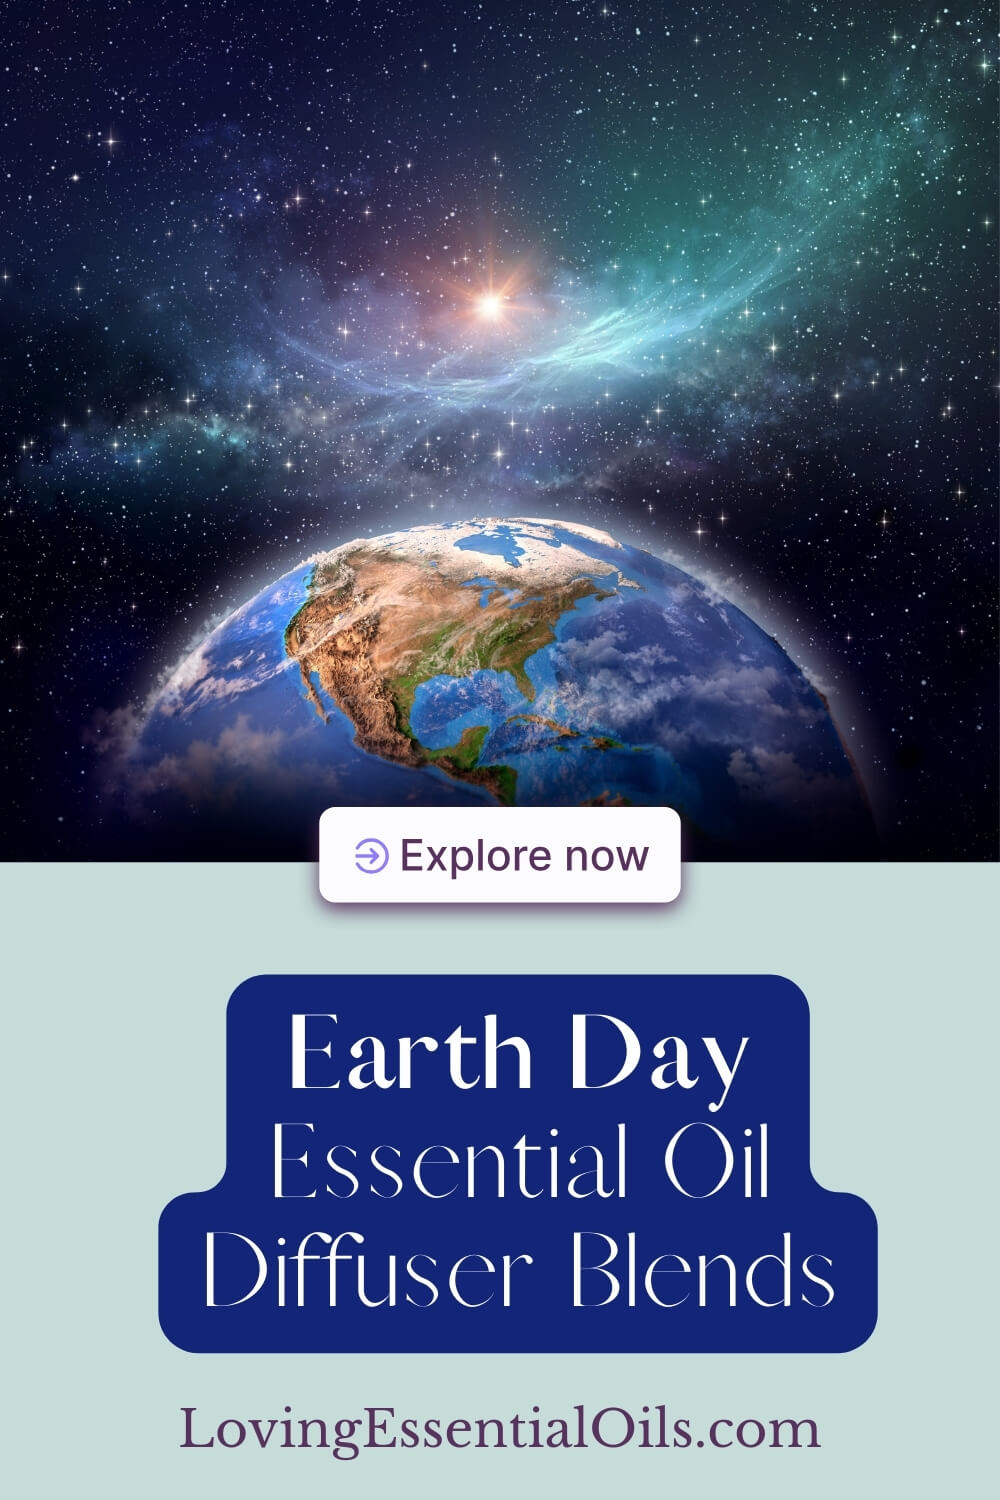 Earth Day Essential Oil Diffuser Blends by Loving Essential Oils